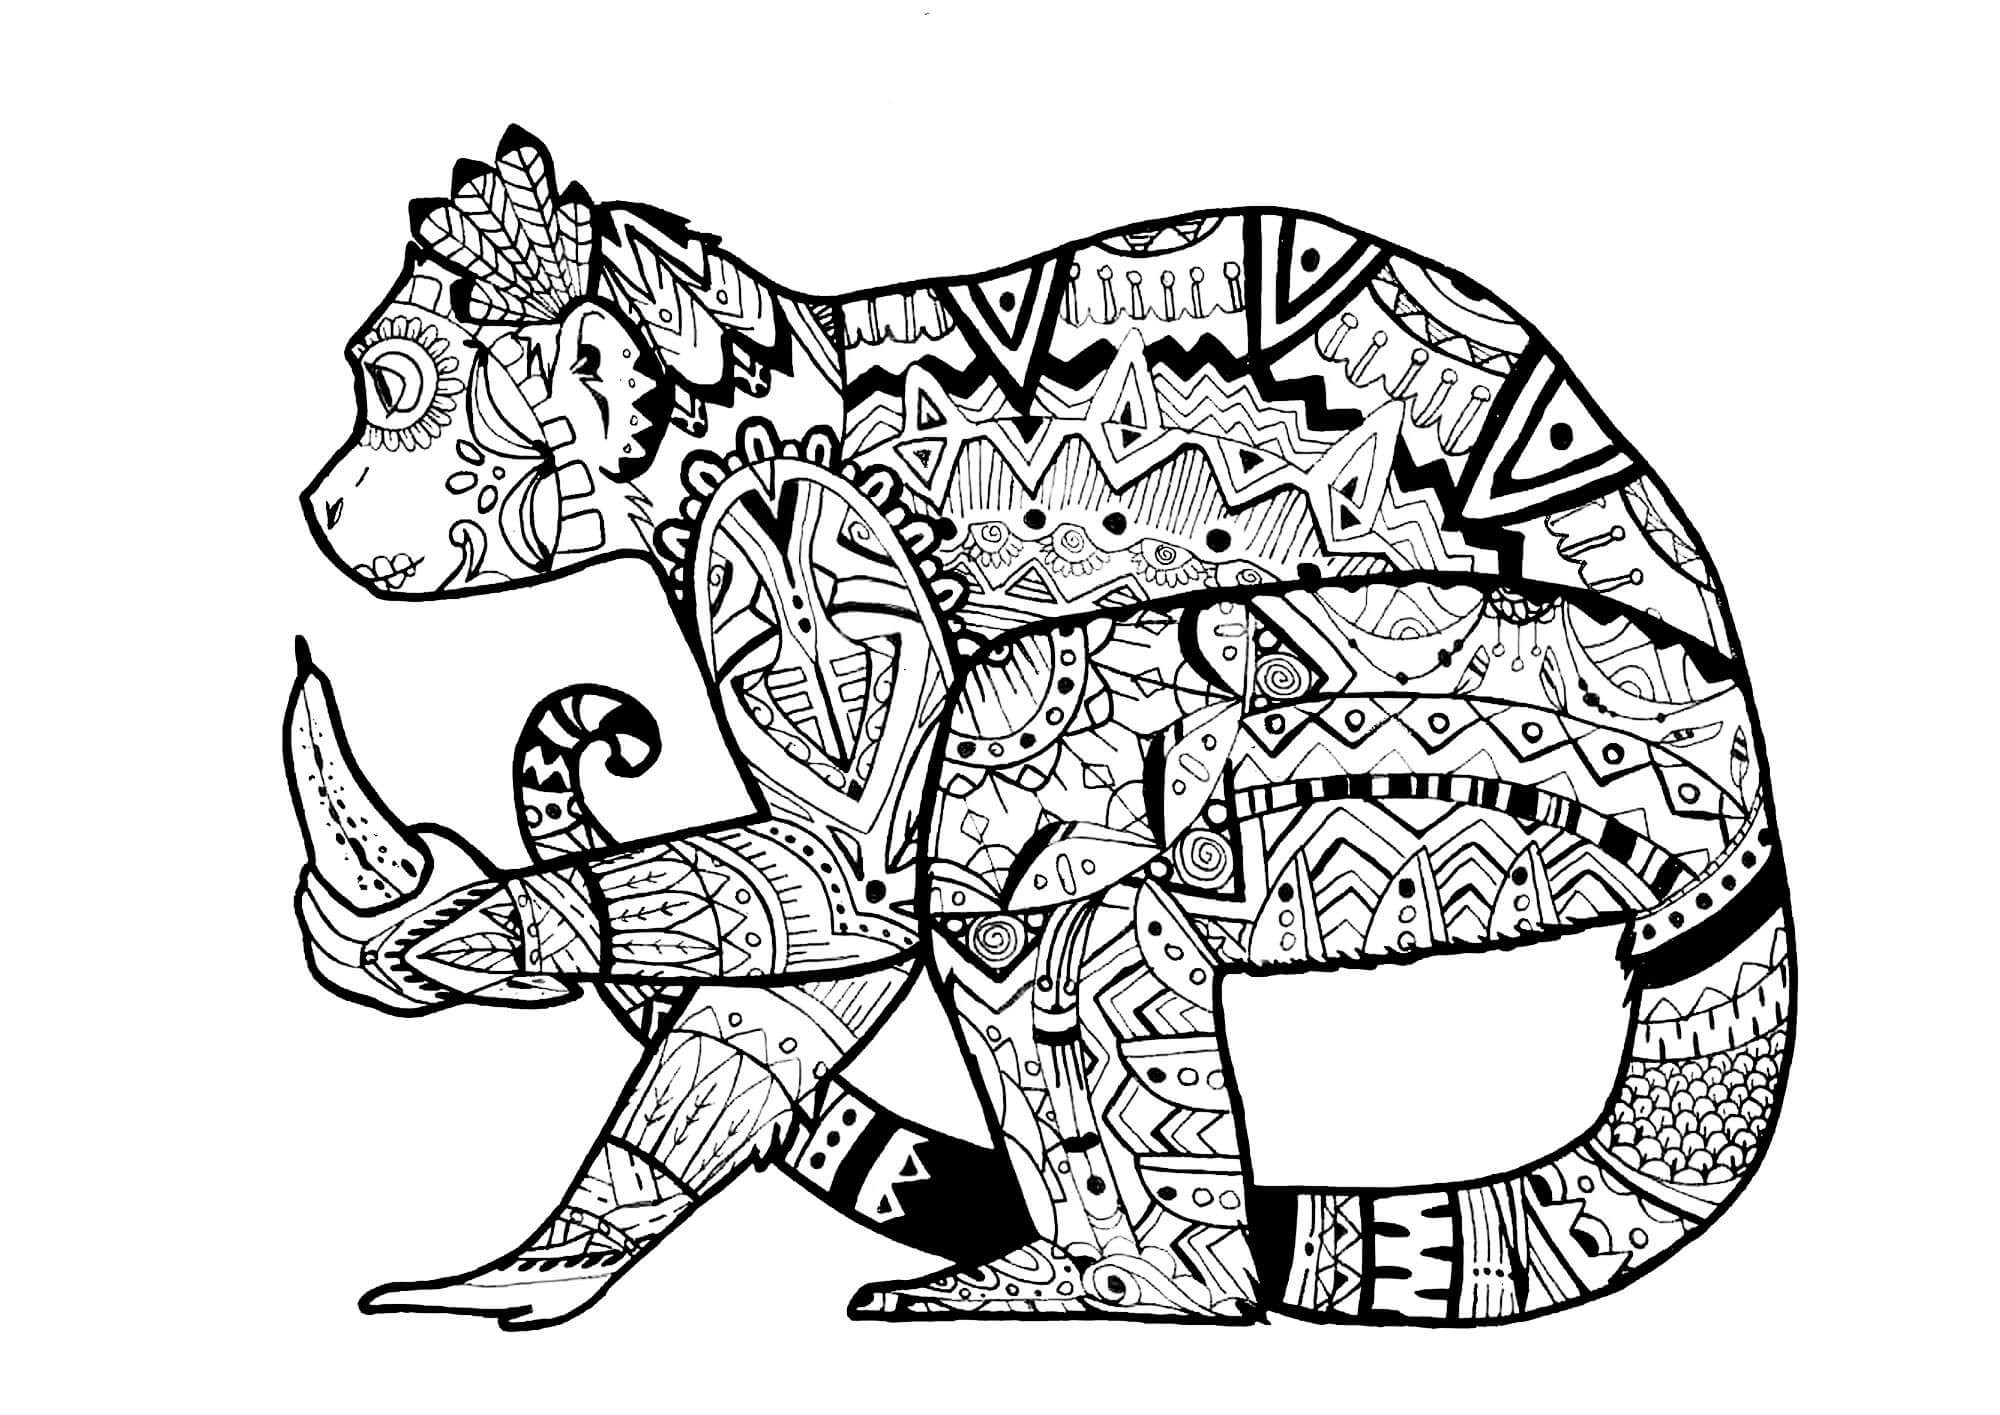 Coloring Pages For Adults Difficult Animals
 Coloring Pages For Adults Difficult Animals 46